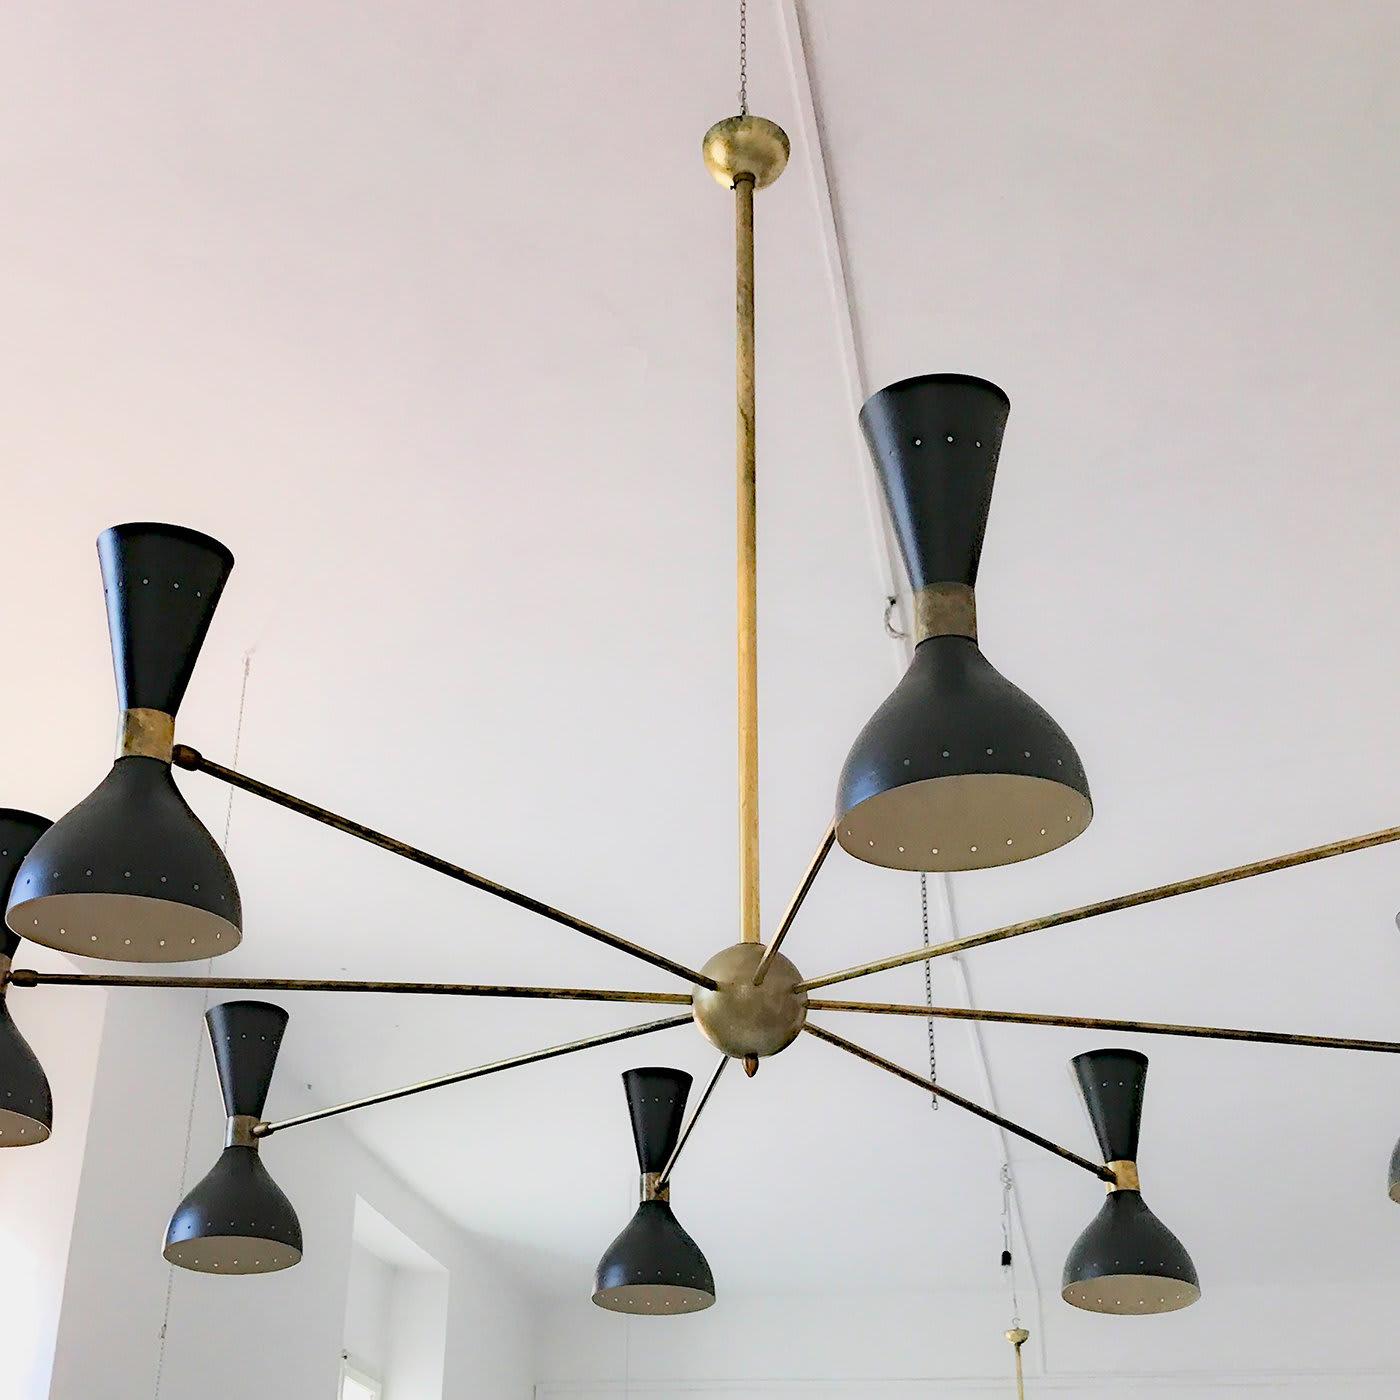 Modern and sophisticated, this chandelier is the ideal choice to make a statement in a modern dining or living room. Its natural solid brass structure comprises a central stem from which radiate eight arms. The aluminum shades are 12.5 cm long with